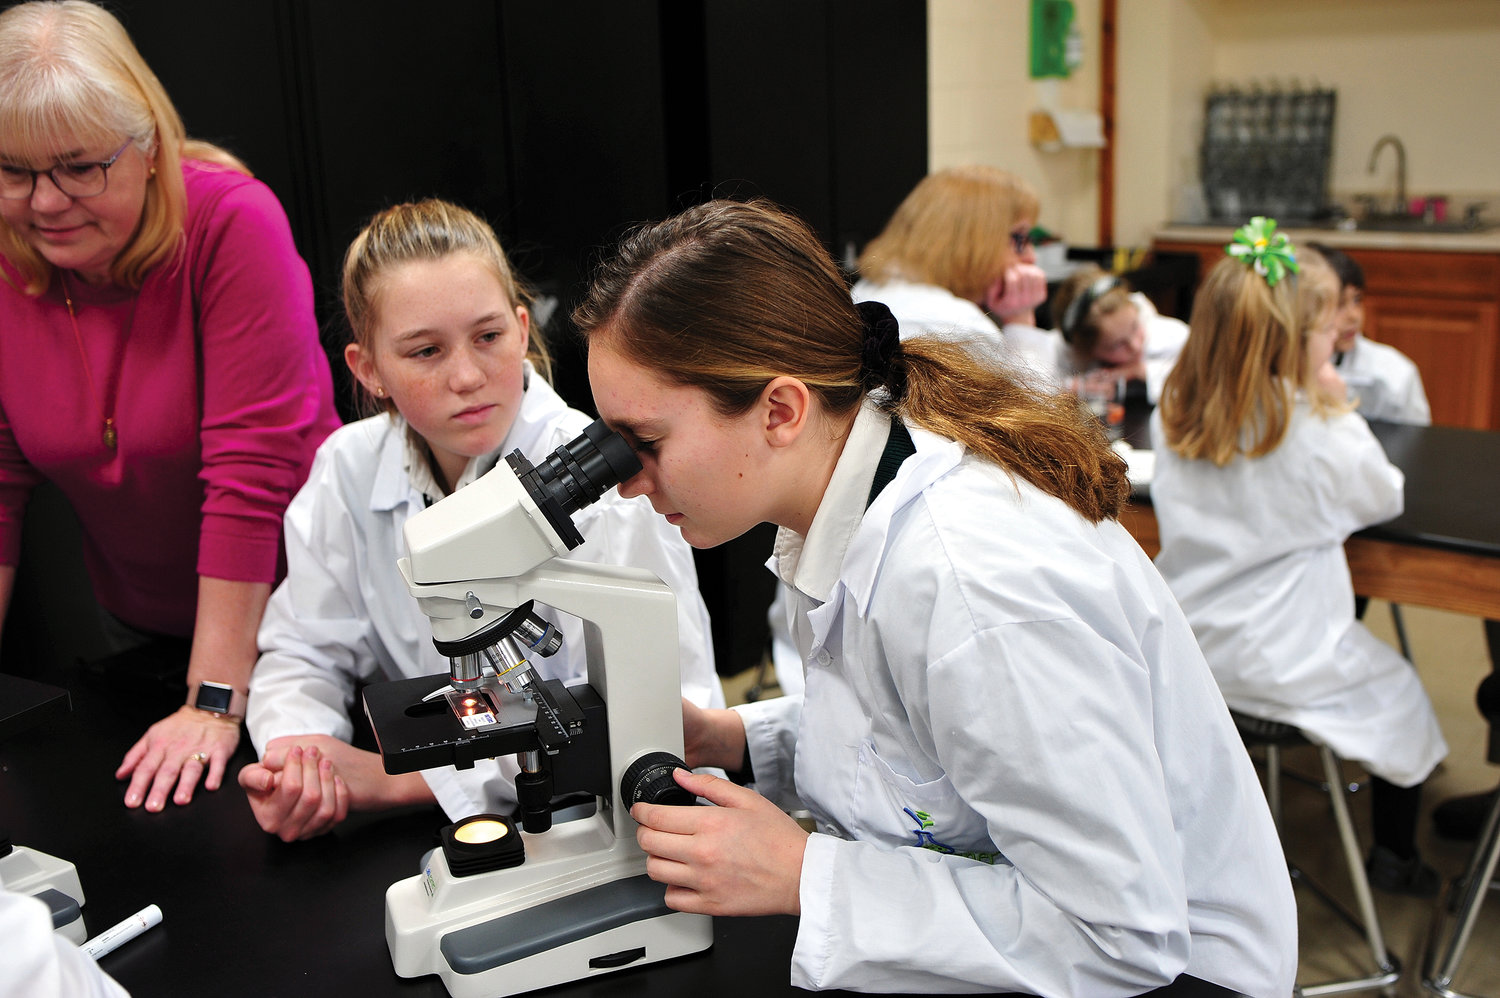 Deidre Connolly, left, and Jillian Beresford, students at St. Denis-St. Columba School in Hopewell Junction, use a microscope as science teacher Diana Spera looks on Jan. 10.